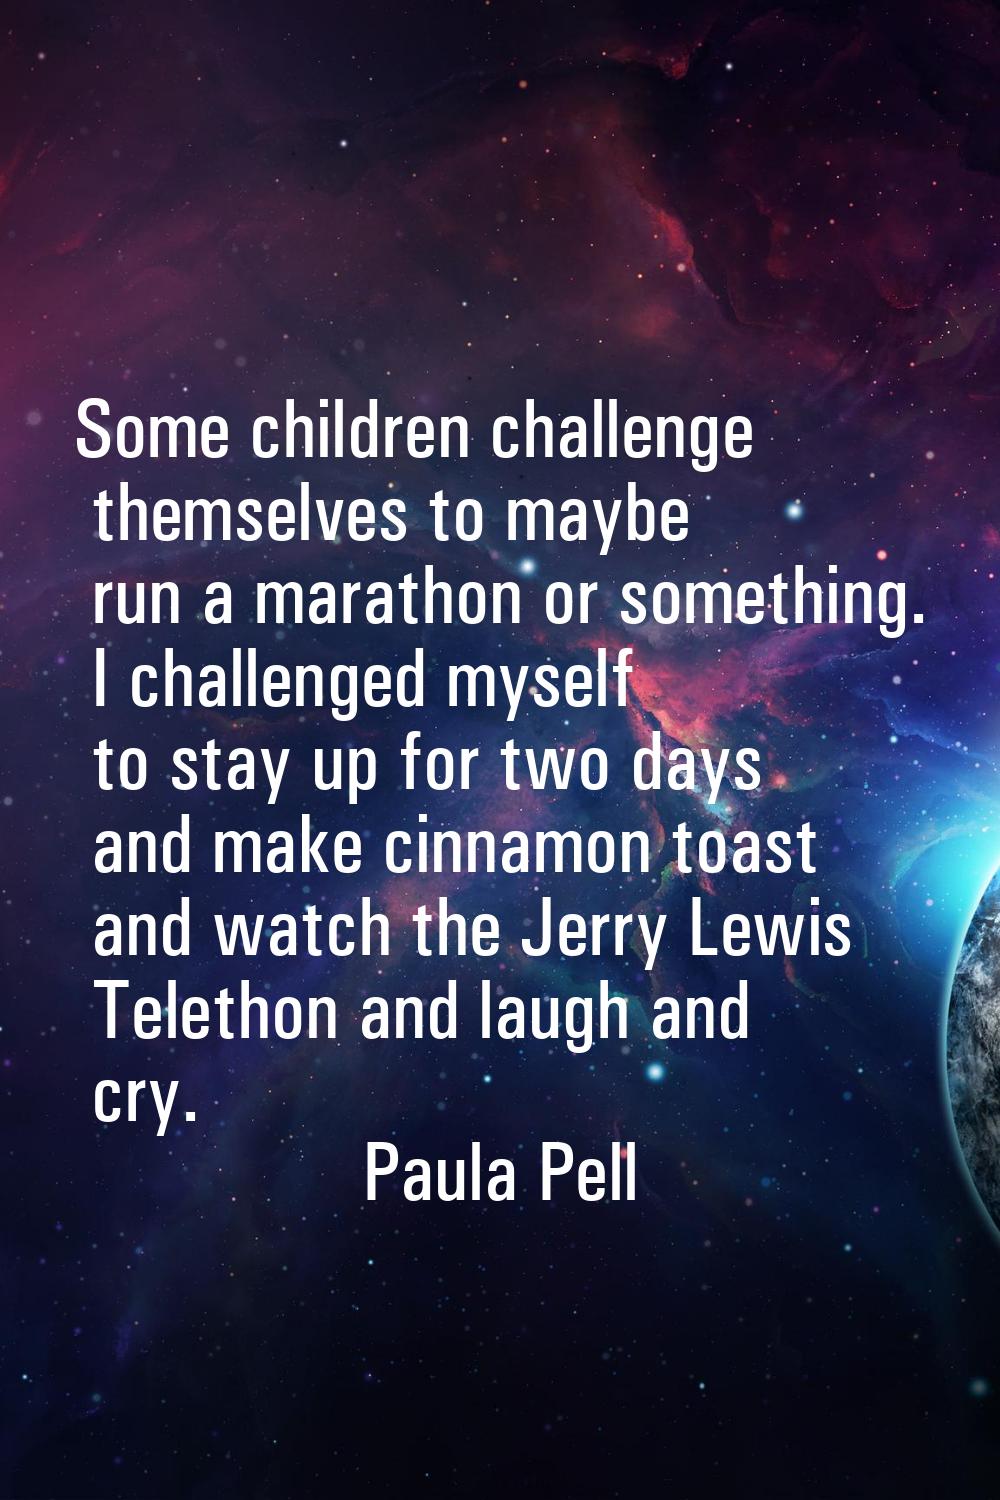 Some children challenge themselves to maybe run a marathon or something. I challenged myself to sta